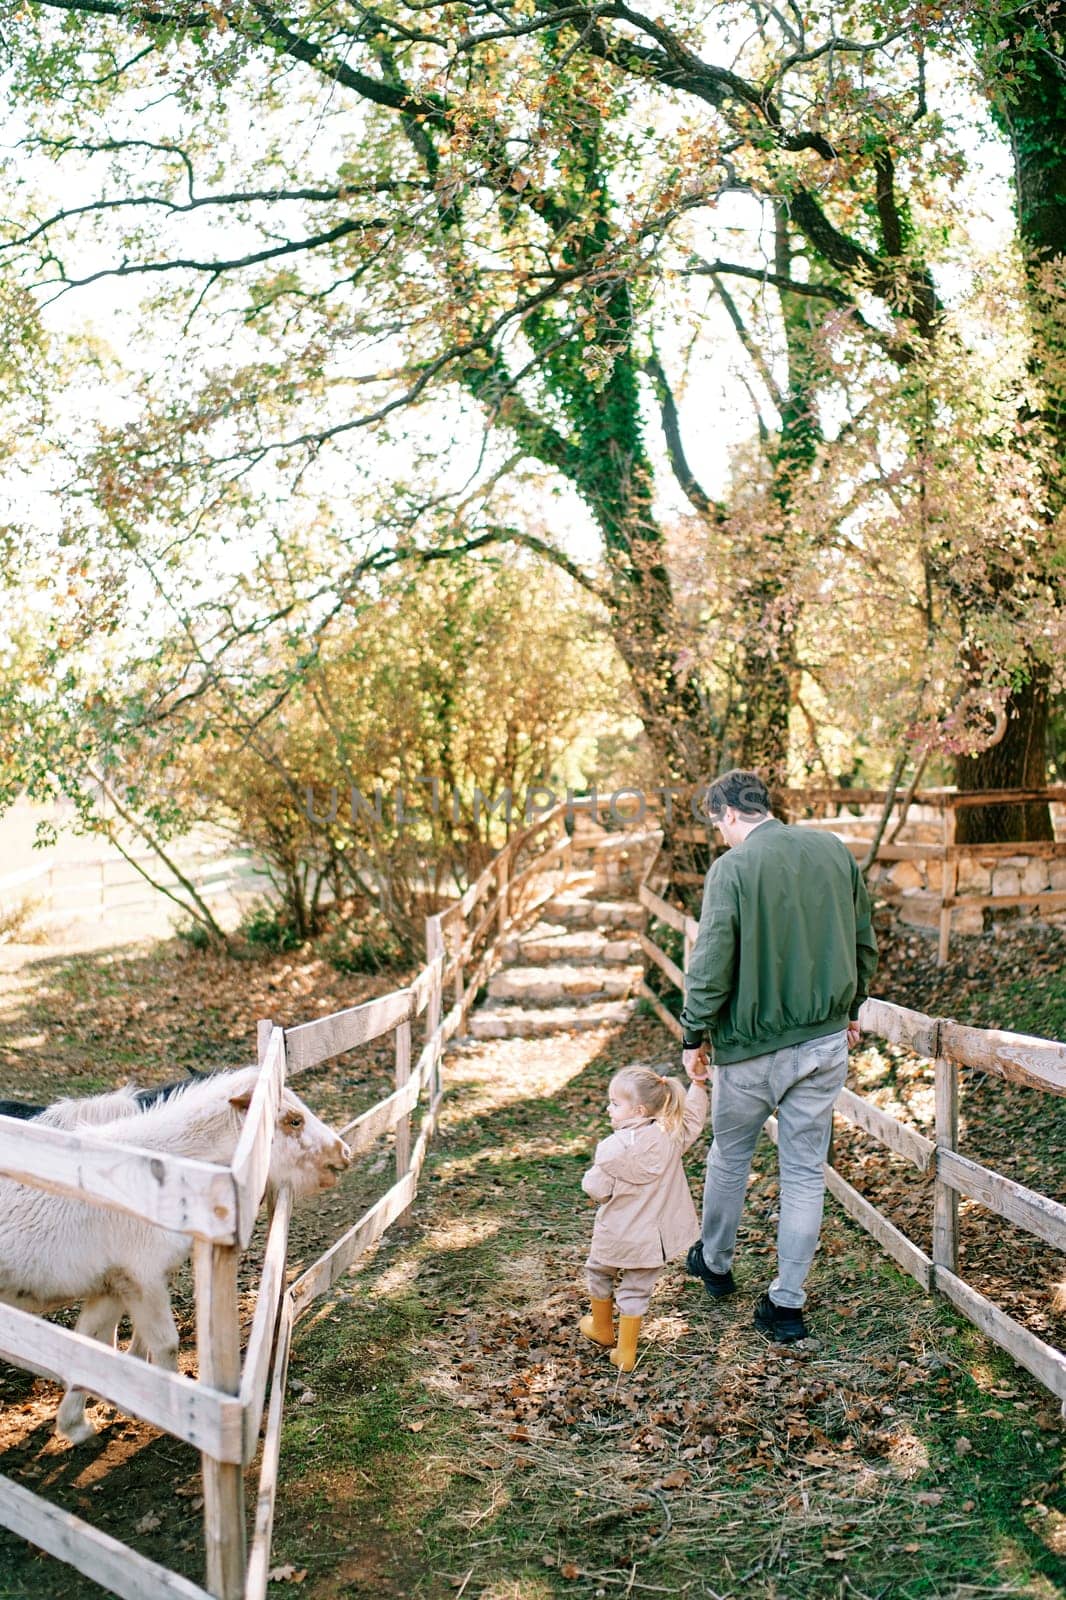 Dad and a little girl are walking along a path between fences with a pony in the garden. Back view by Nadtochiy